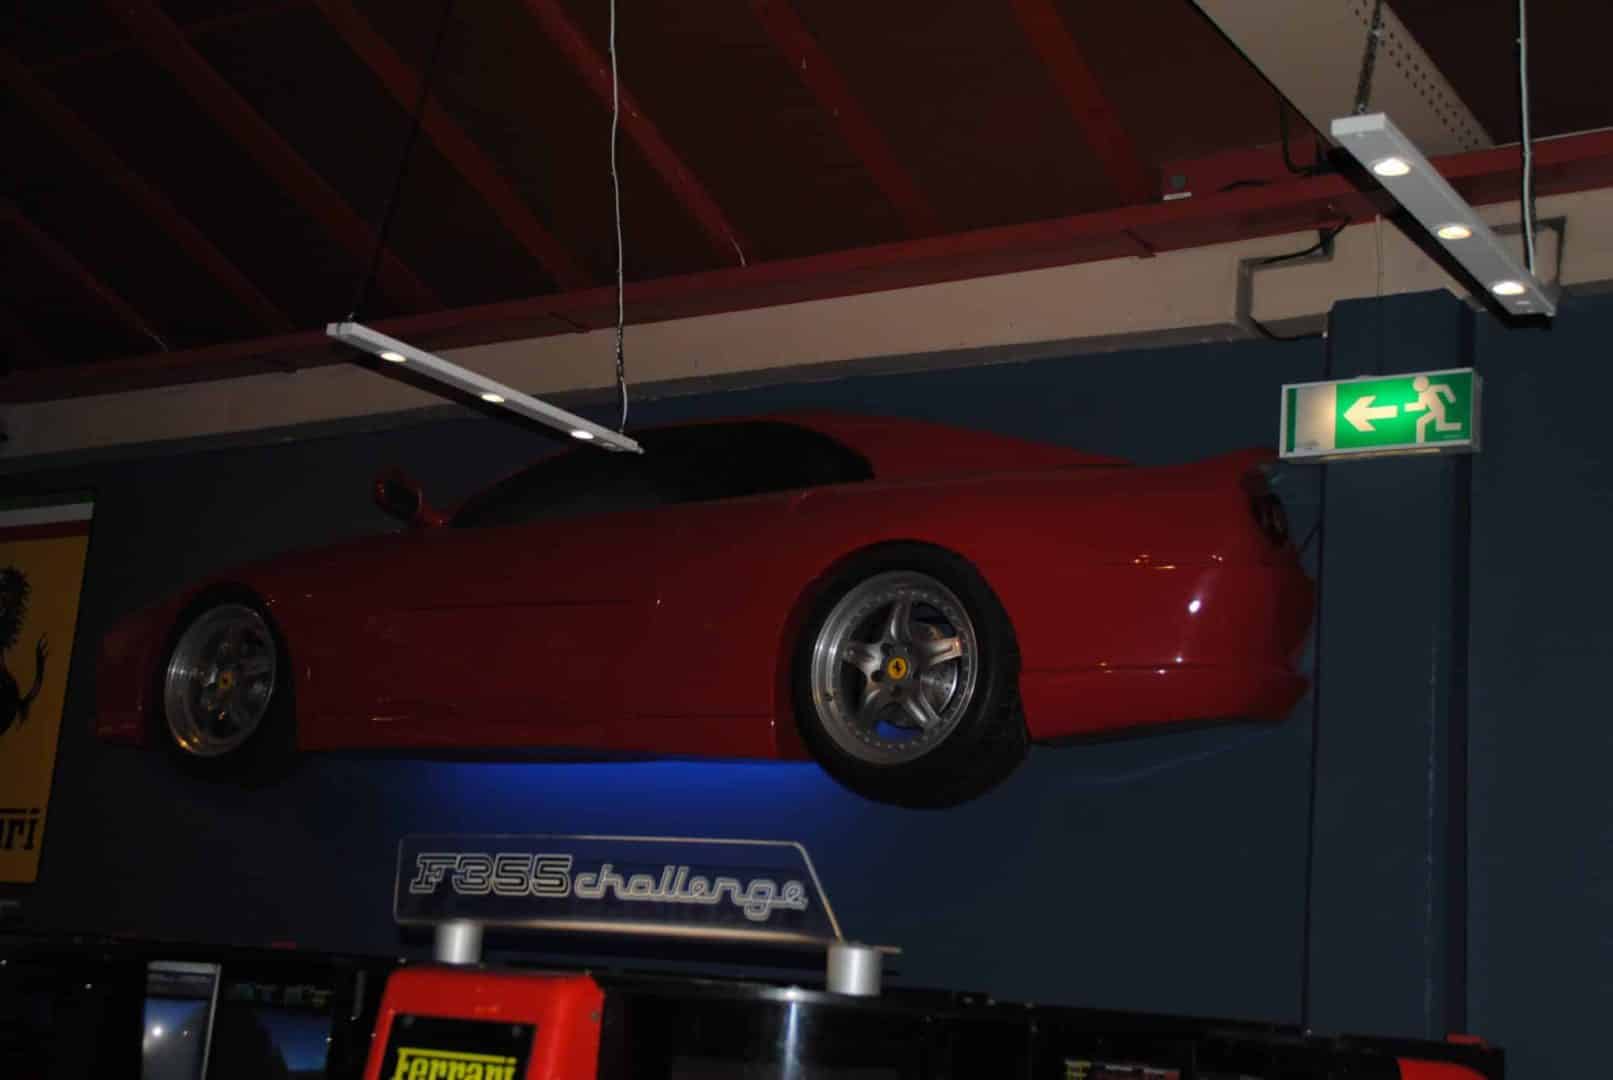 F355 Challenge Wall Thingy :D